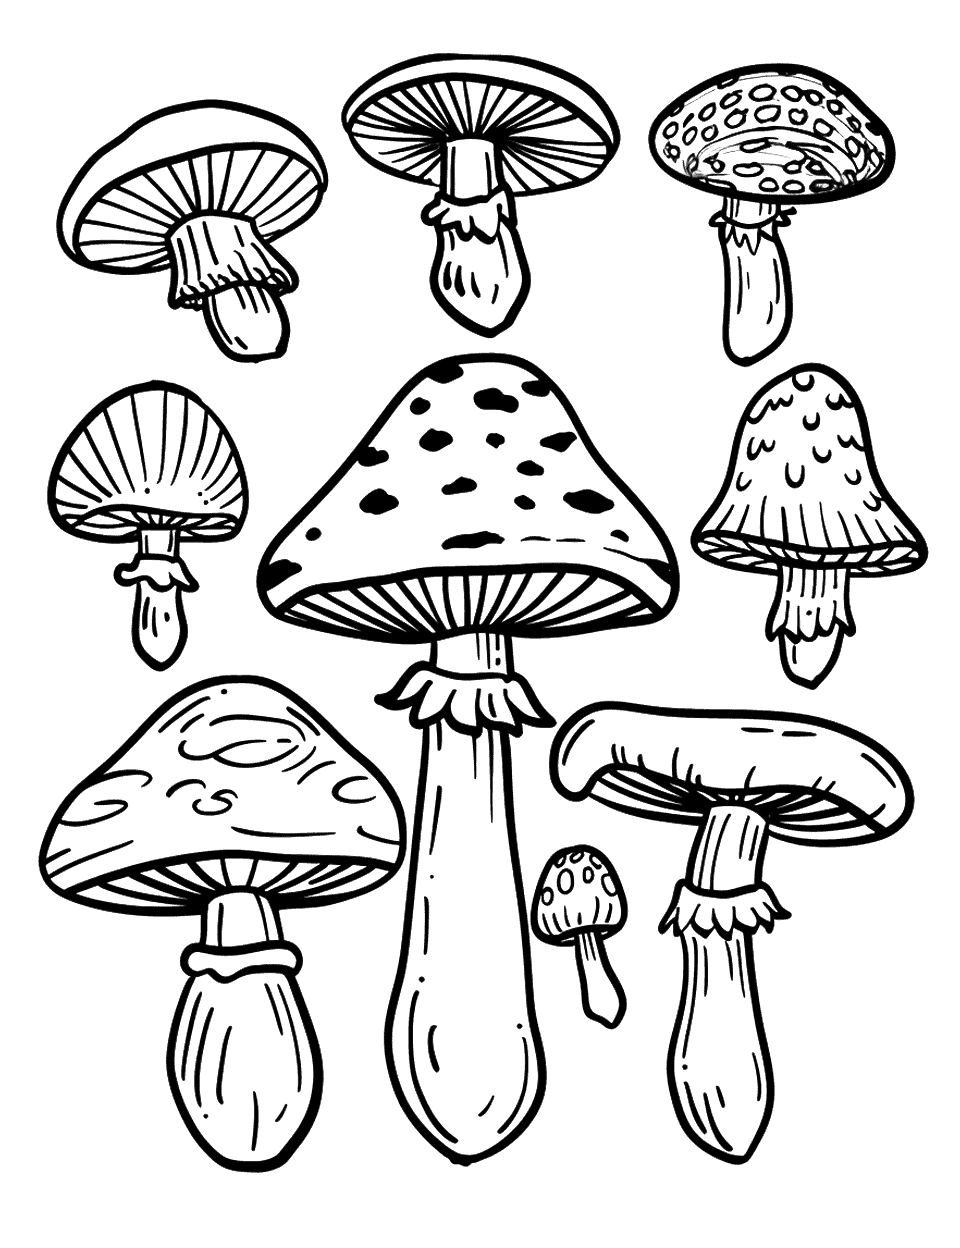 Unique Patterned Mushrooms Mushroom Coloring Page - A variety of mushrooms with a unique and intricate patterns on their caps.